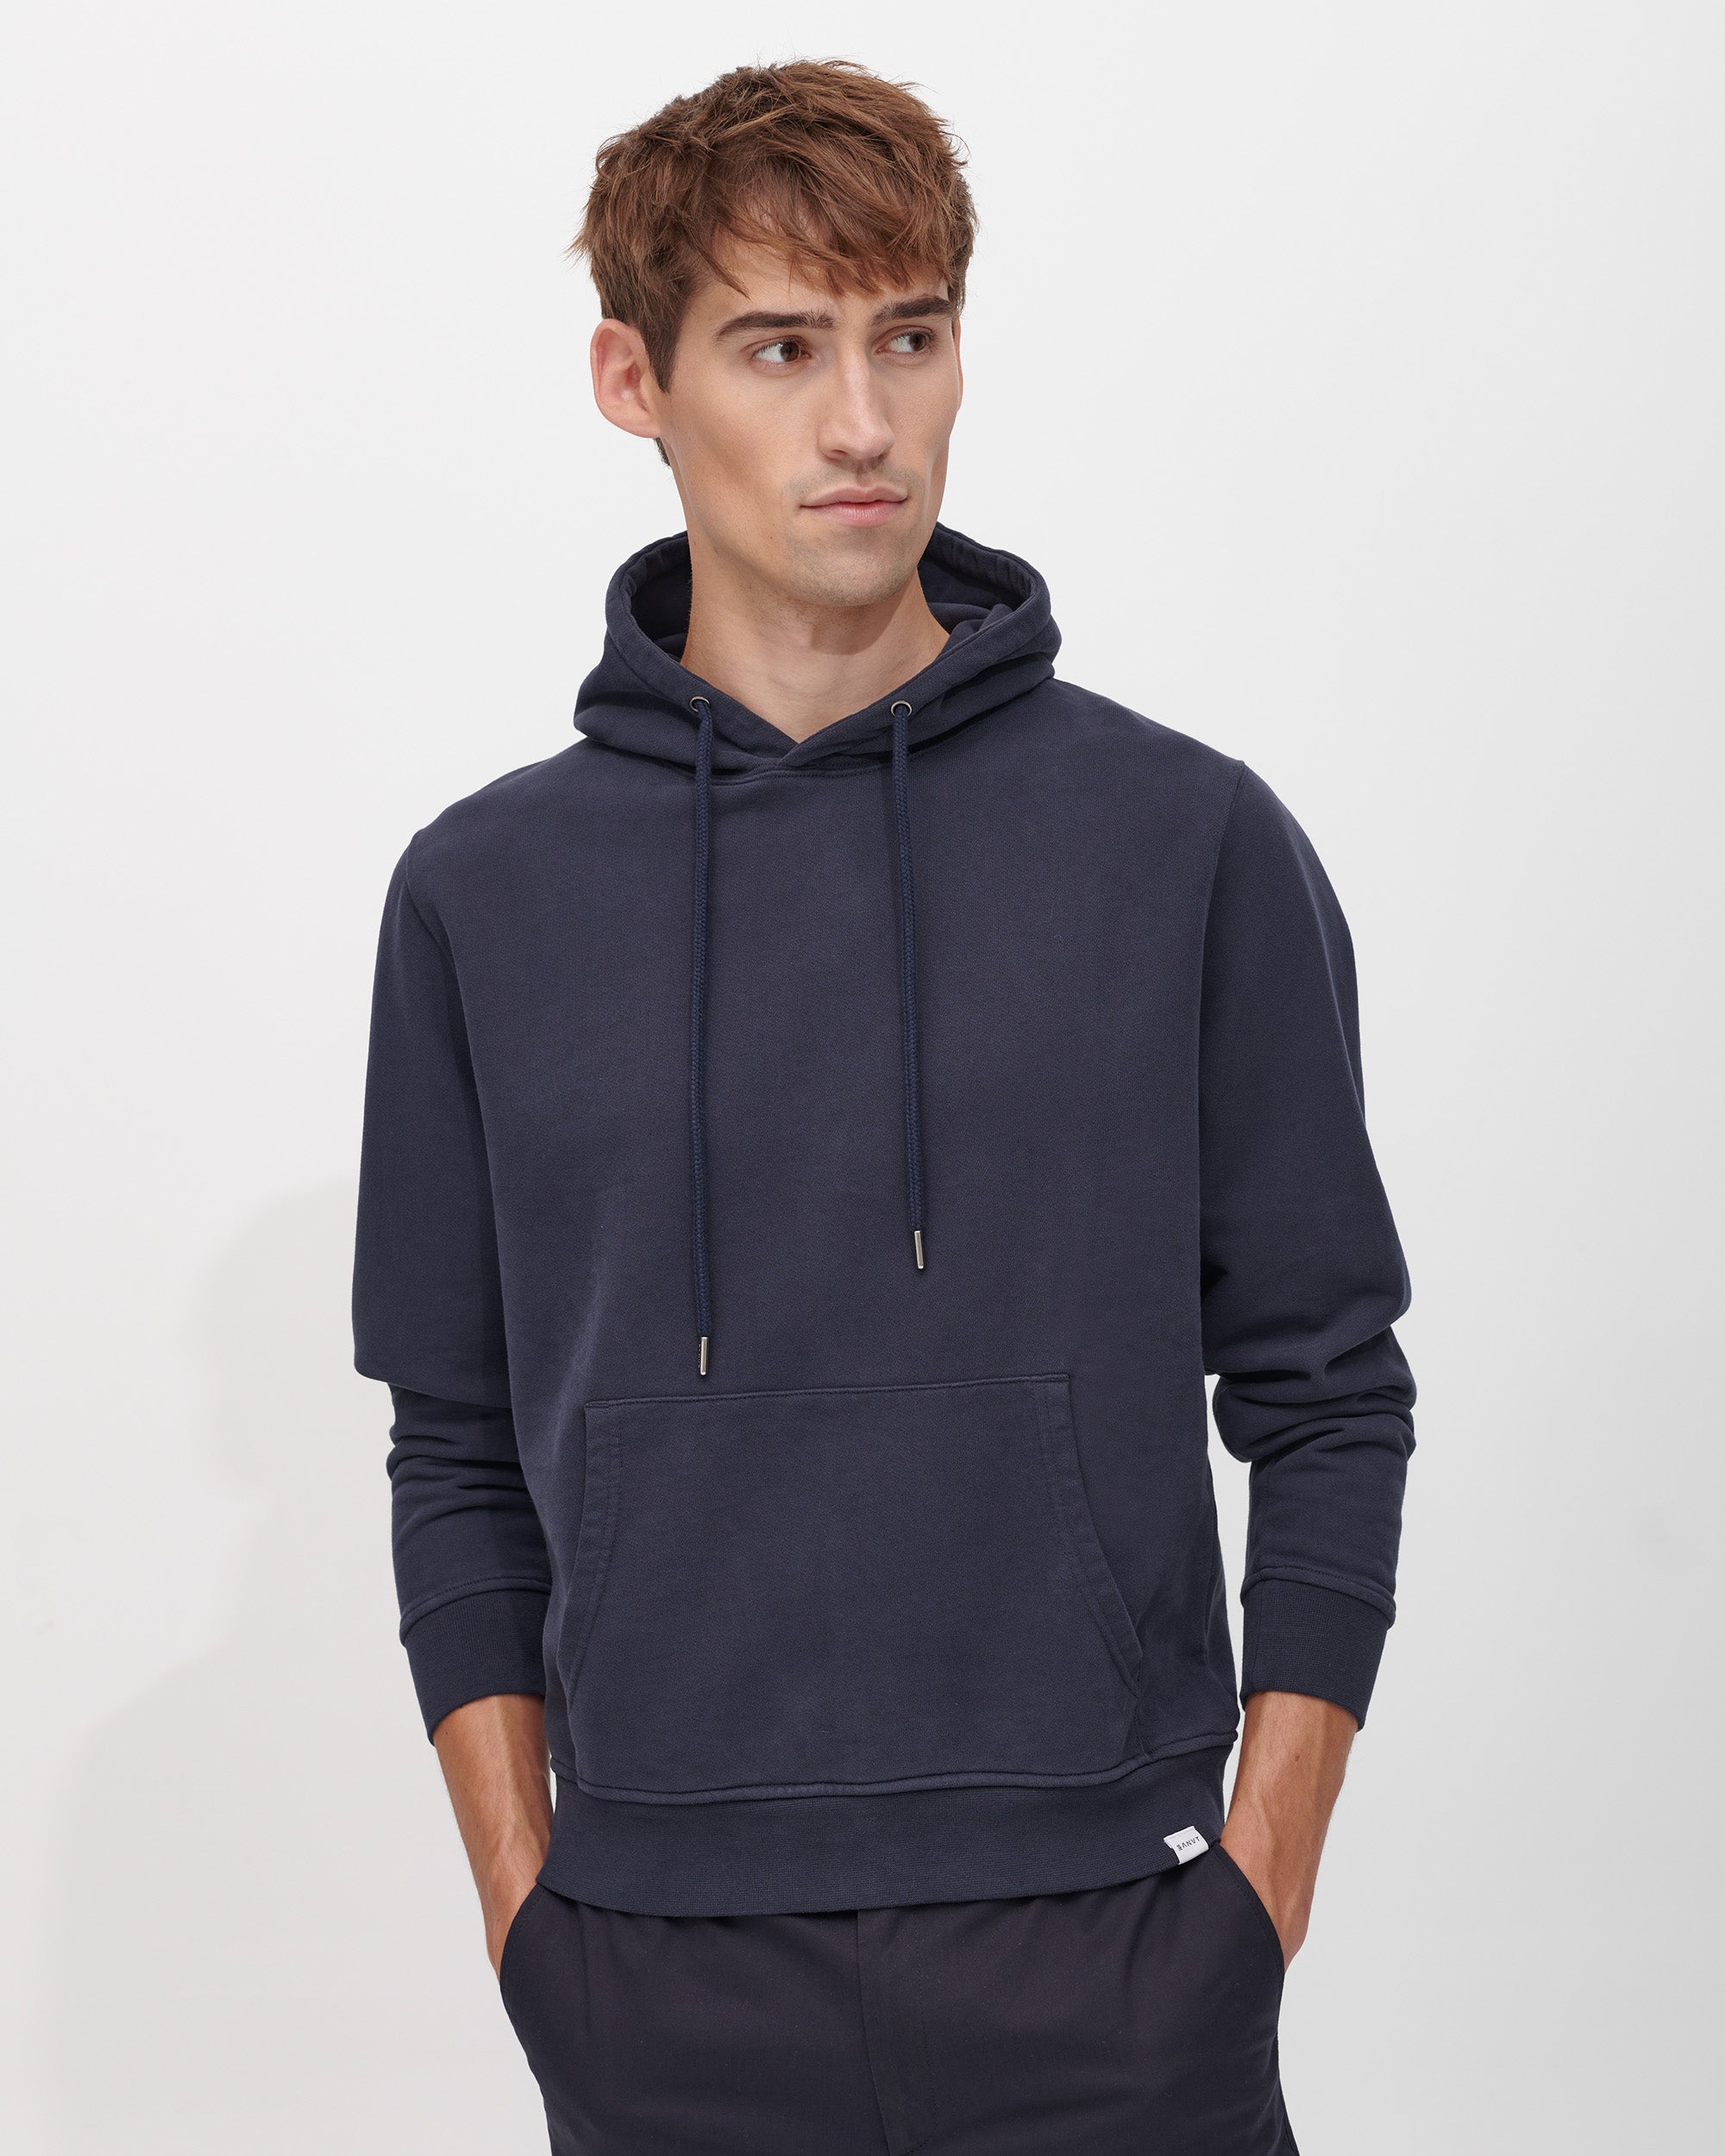 Perfect Navy Blue Hoodie for Men | 400GSM Organic Cotton